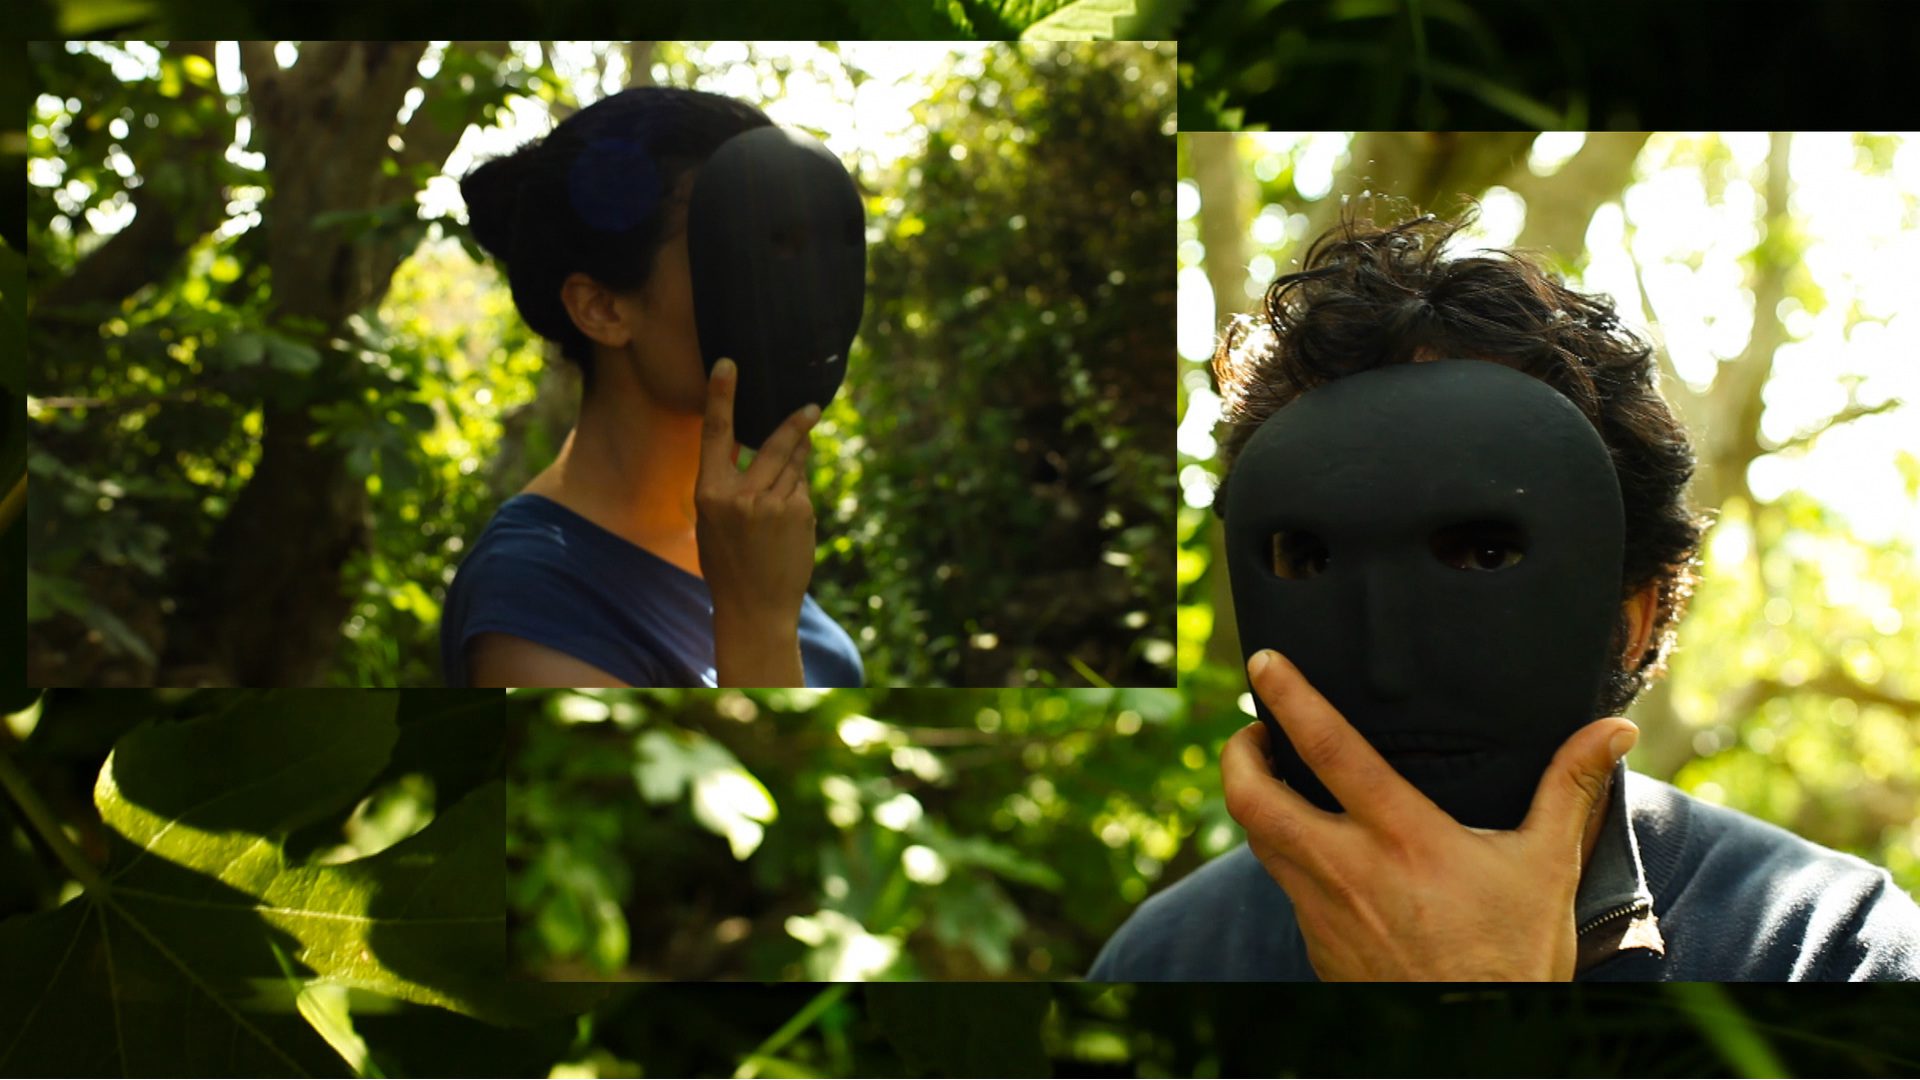 Basel Abbas and Ruanne Abou-Rahme, And yet my mask is powerful Part 1 (2016). Video still. Courtesy of the artists